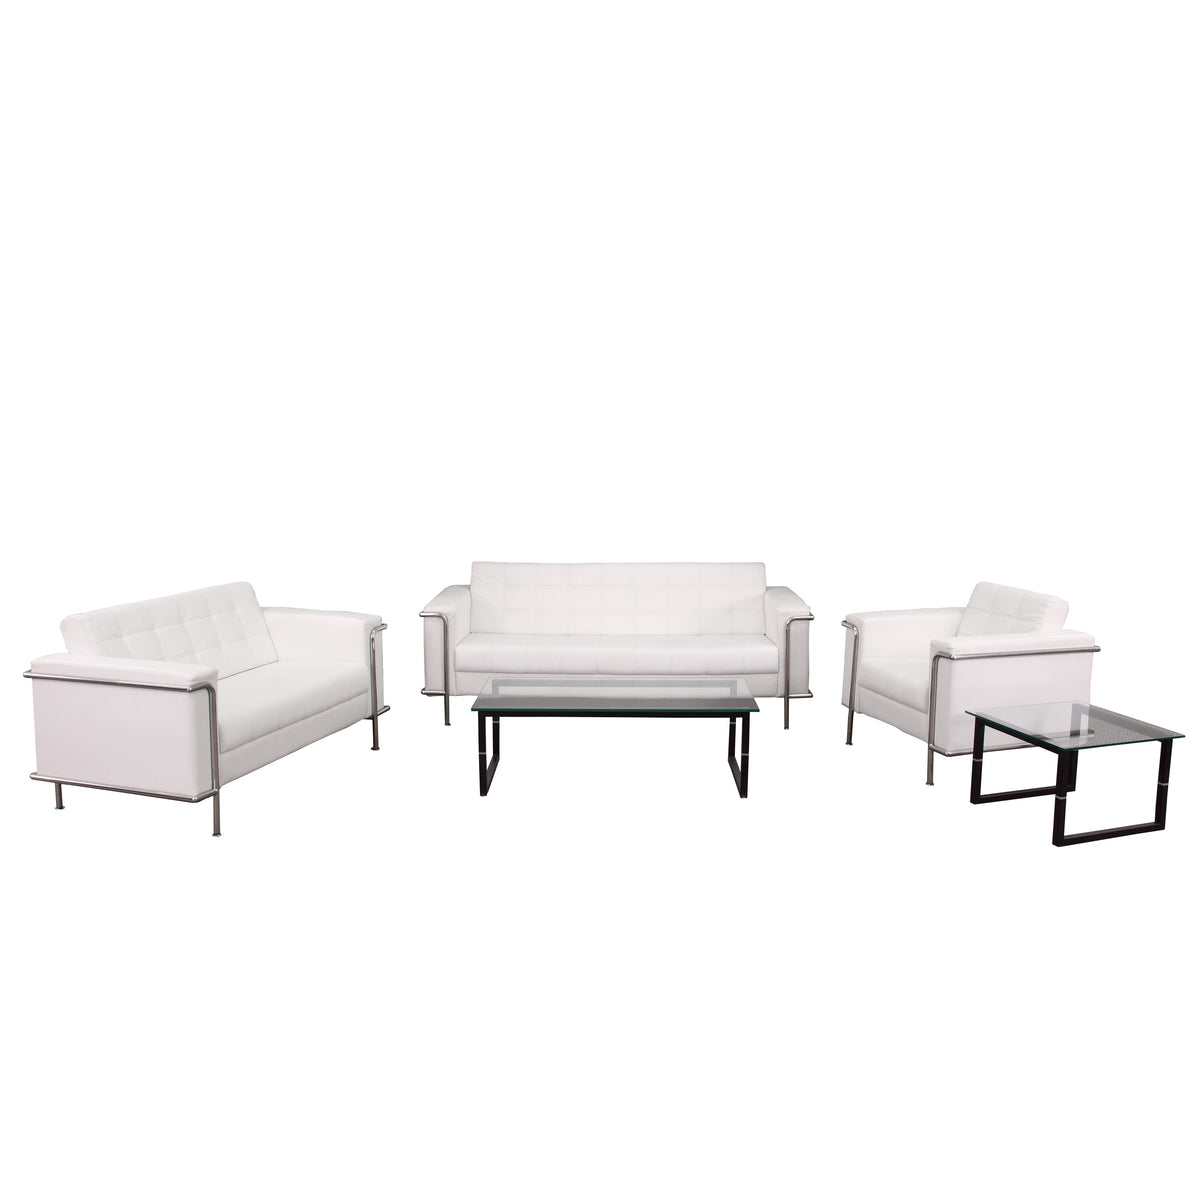 Melrose White |#| White LeatherSoft Double Stitch Detail Reception Set with Encasing Frame